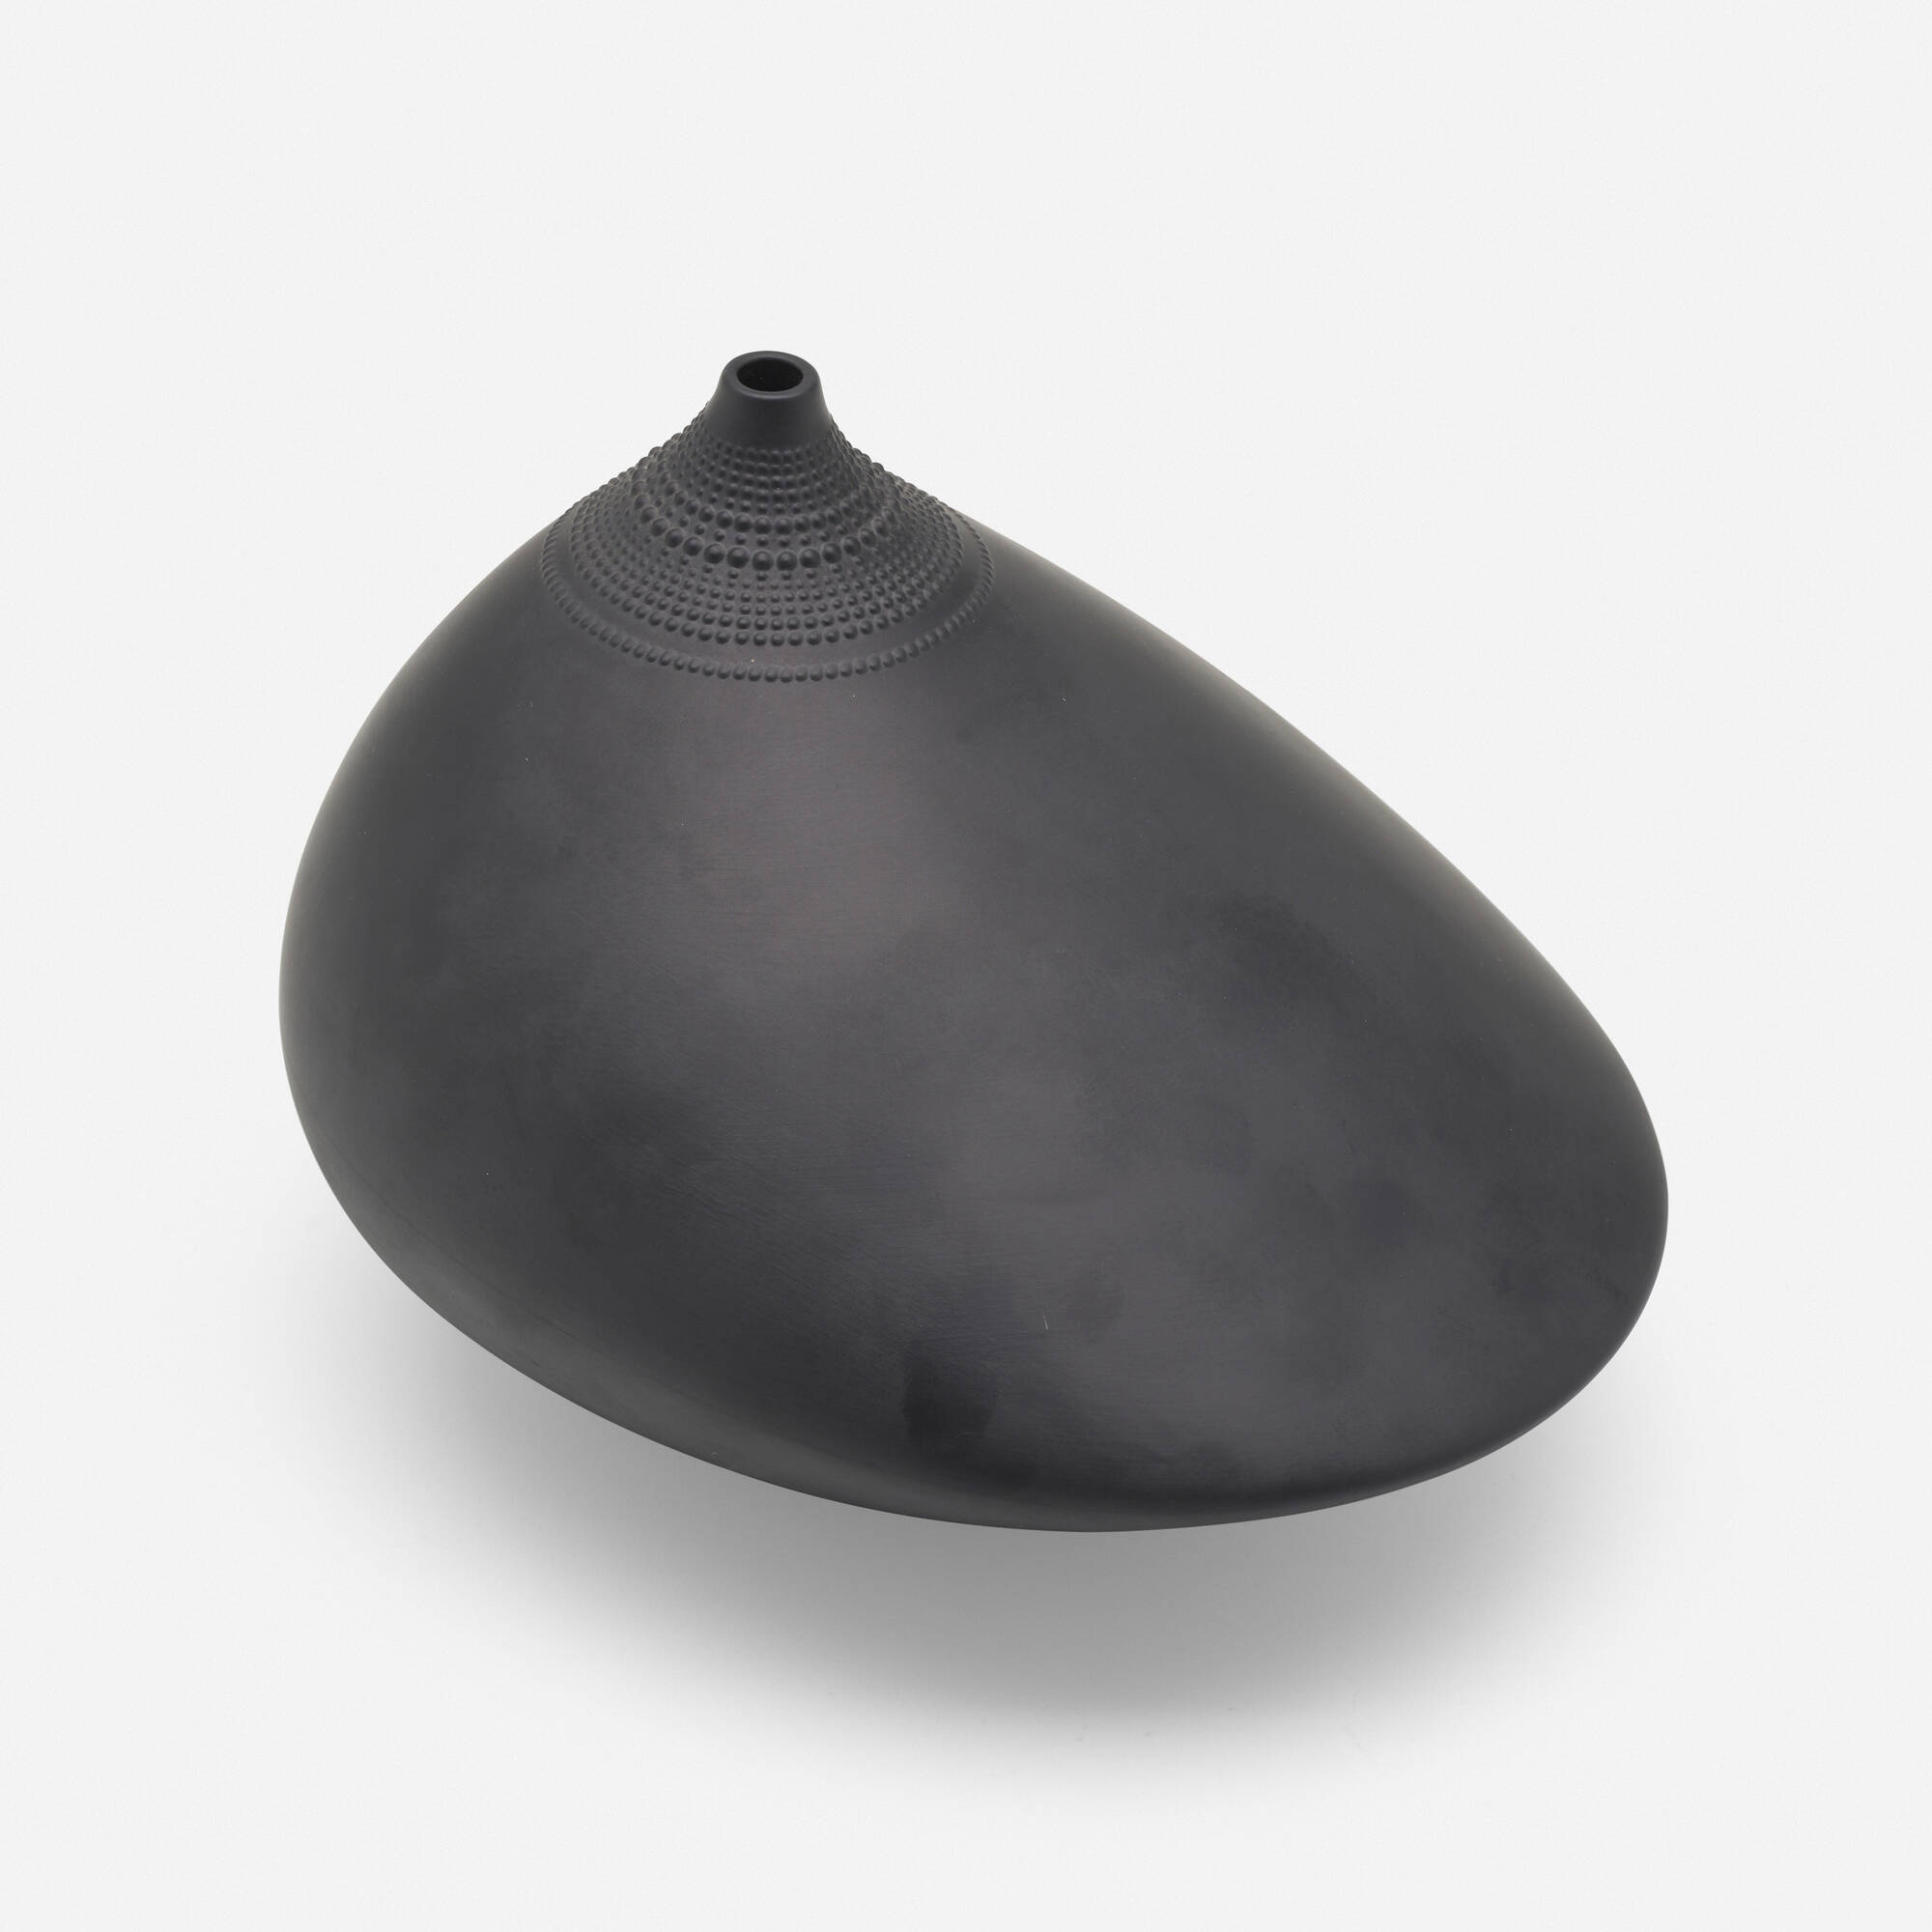 593: SAMI WIRKKALA, Pollo vase < Mass Modern: Day 2, 12 August 2022 <  Auctions | Wright: Auctions of Art and Design